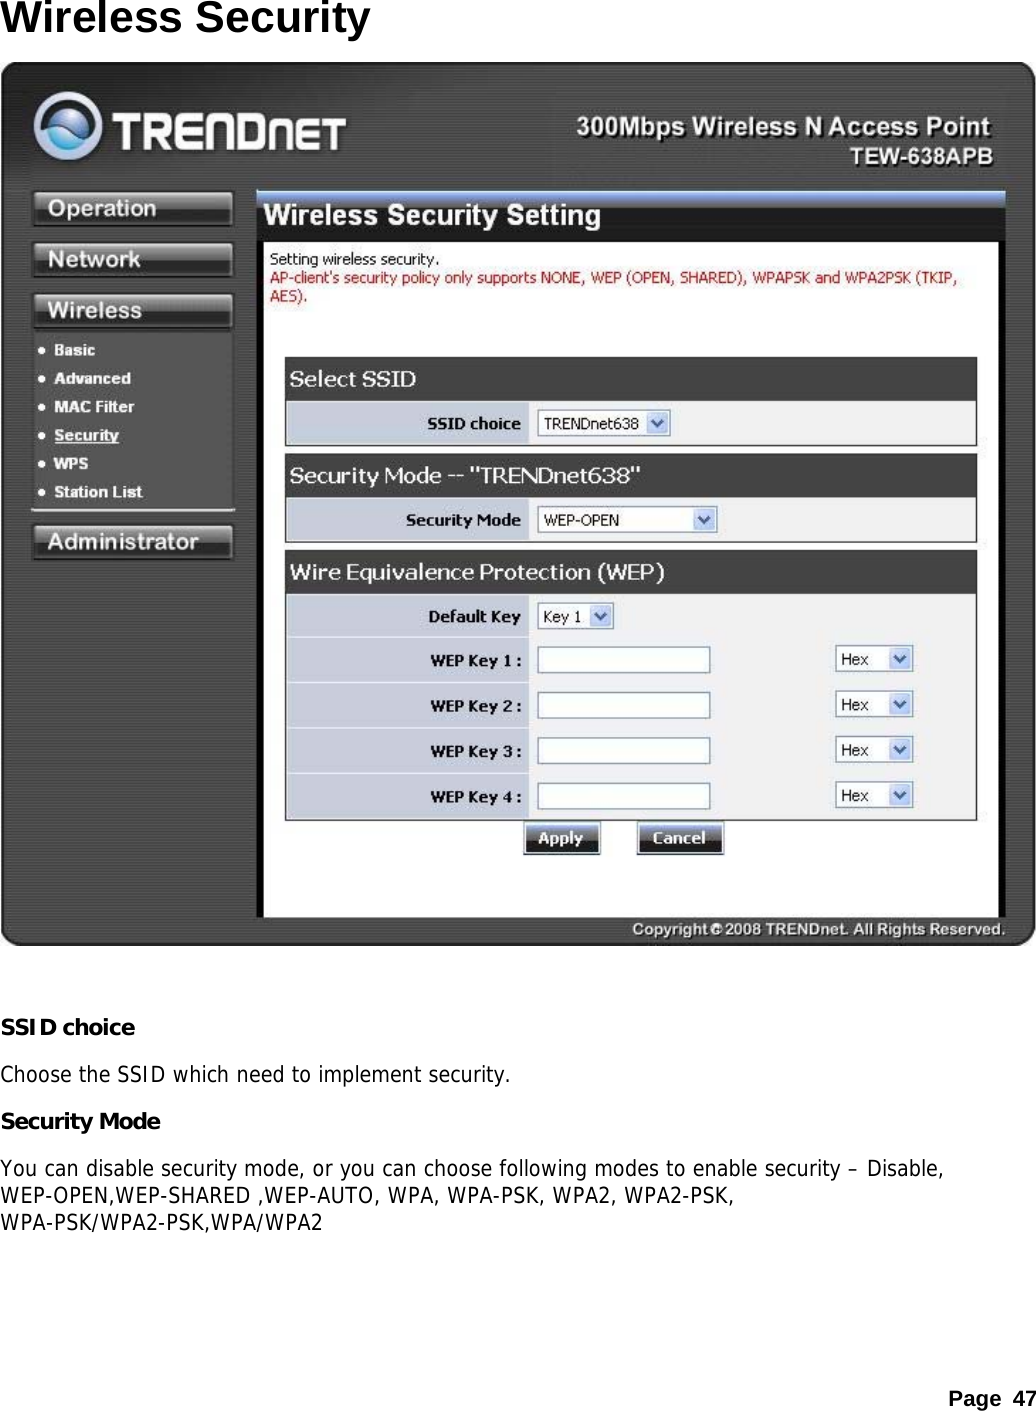 Page 47 Wireless Security   SSID choice Choose the SSID which need to implement security. Security Mode You can disable security mode, or you can choose following modes to enable security – Disable, WEP-OPEN,WEP-SHARED ,WEP-AUTO, WPA, WPA-PSK, WPA2, WPA2-PSK, WPA-PSK/WPA2-PSK,WPA/WPA2  